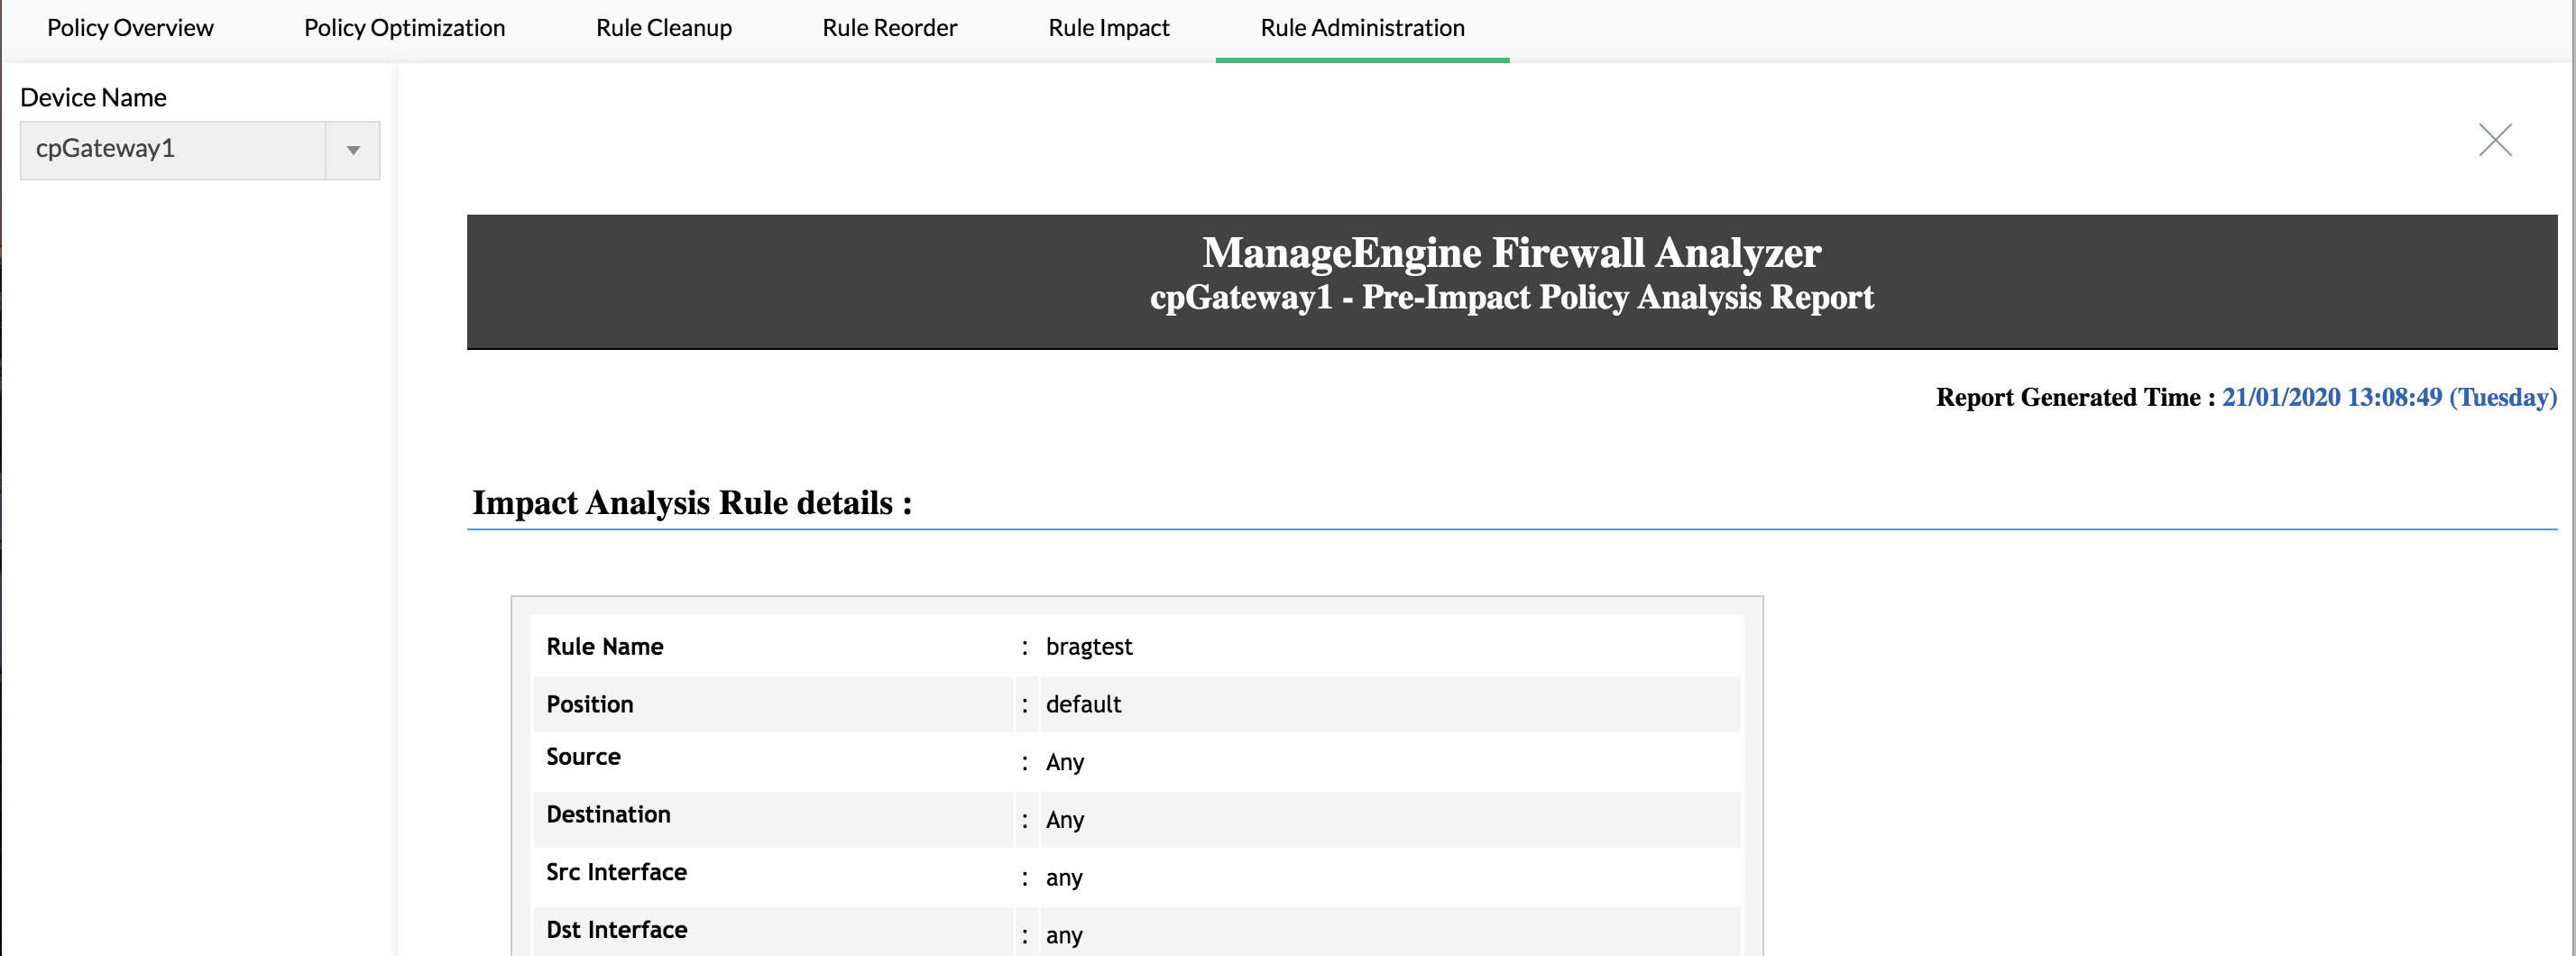 Review impact of firewall rule over existing rule set - Configuring firewall rules - ManageEngine Firewall Analyzer